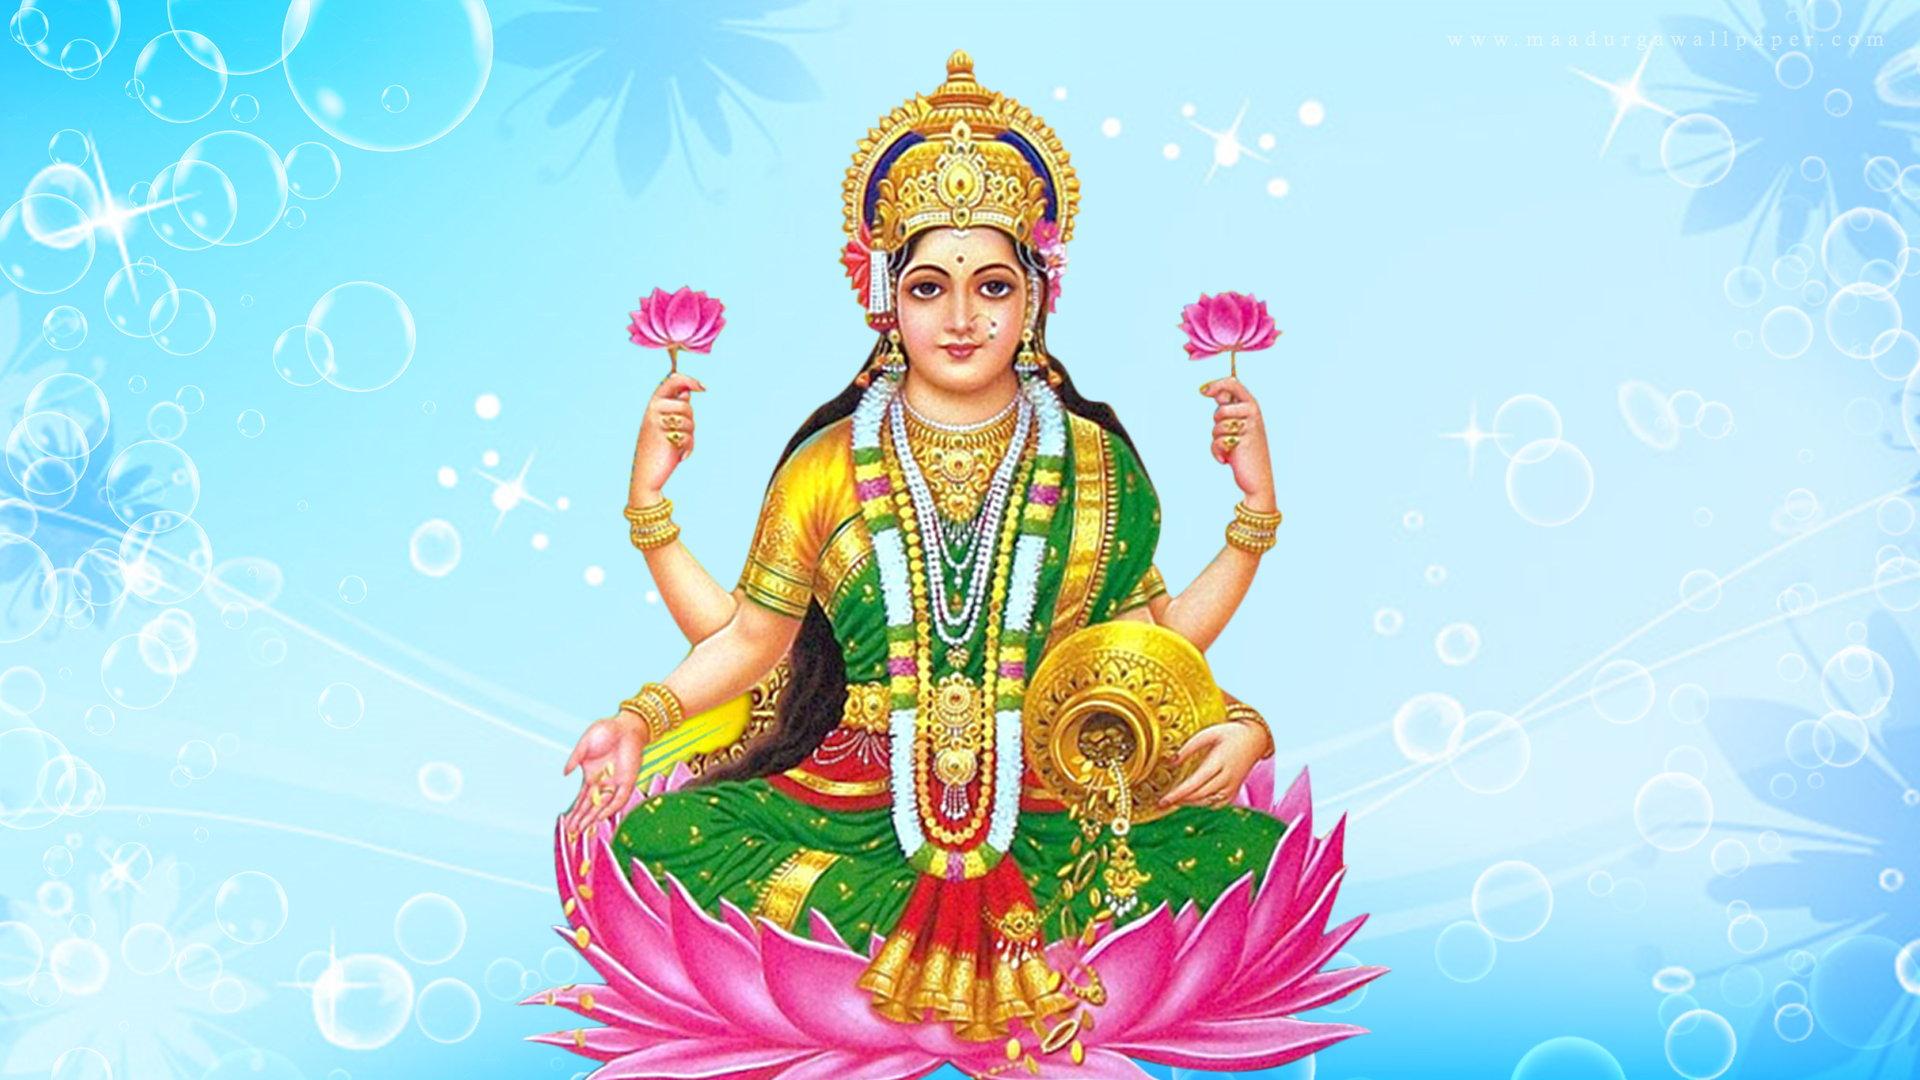 Download Free HD Wallpapers of Maa laxmilakshmi Devi  Maa Lakshmi  Dhanteras Wallpapers